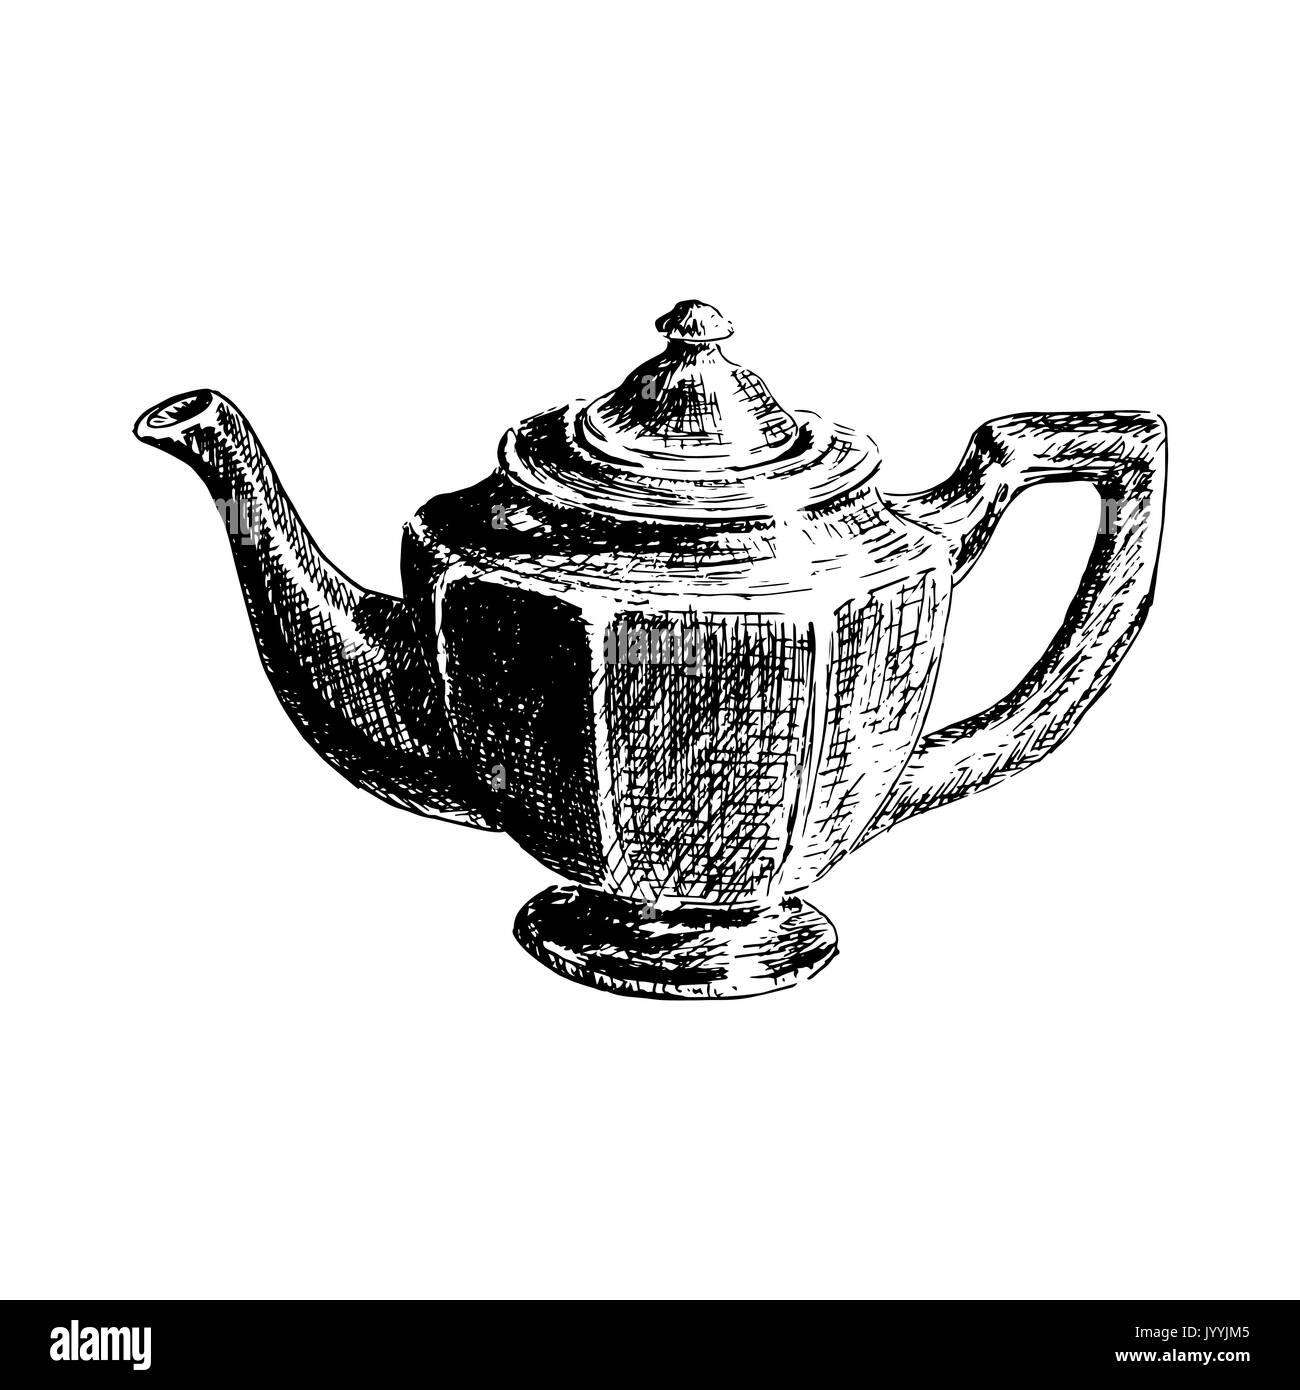 Cooking Pot Black White Vector Images (over 23,000)